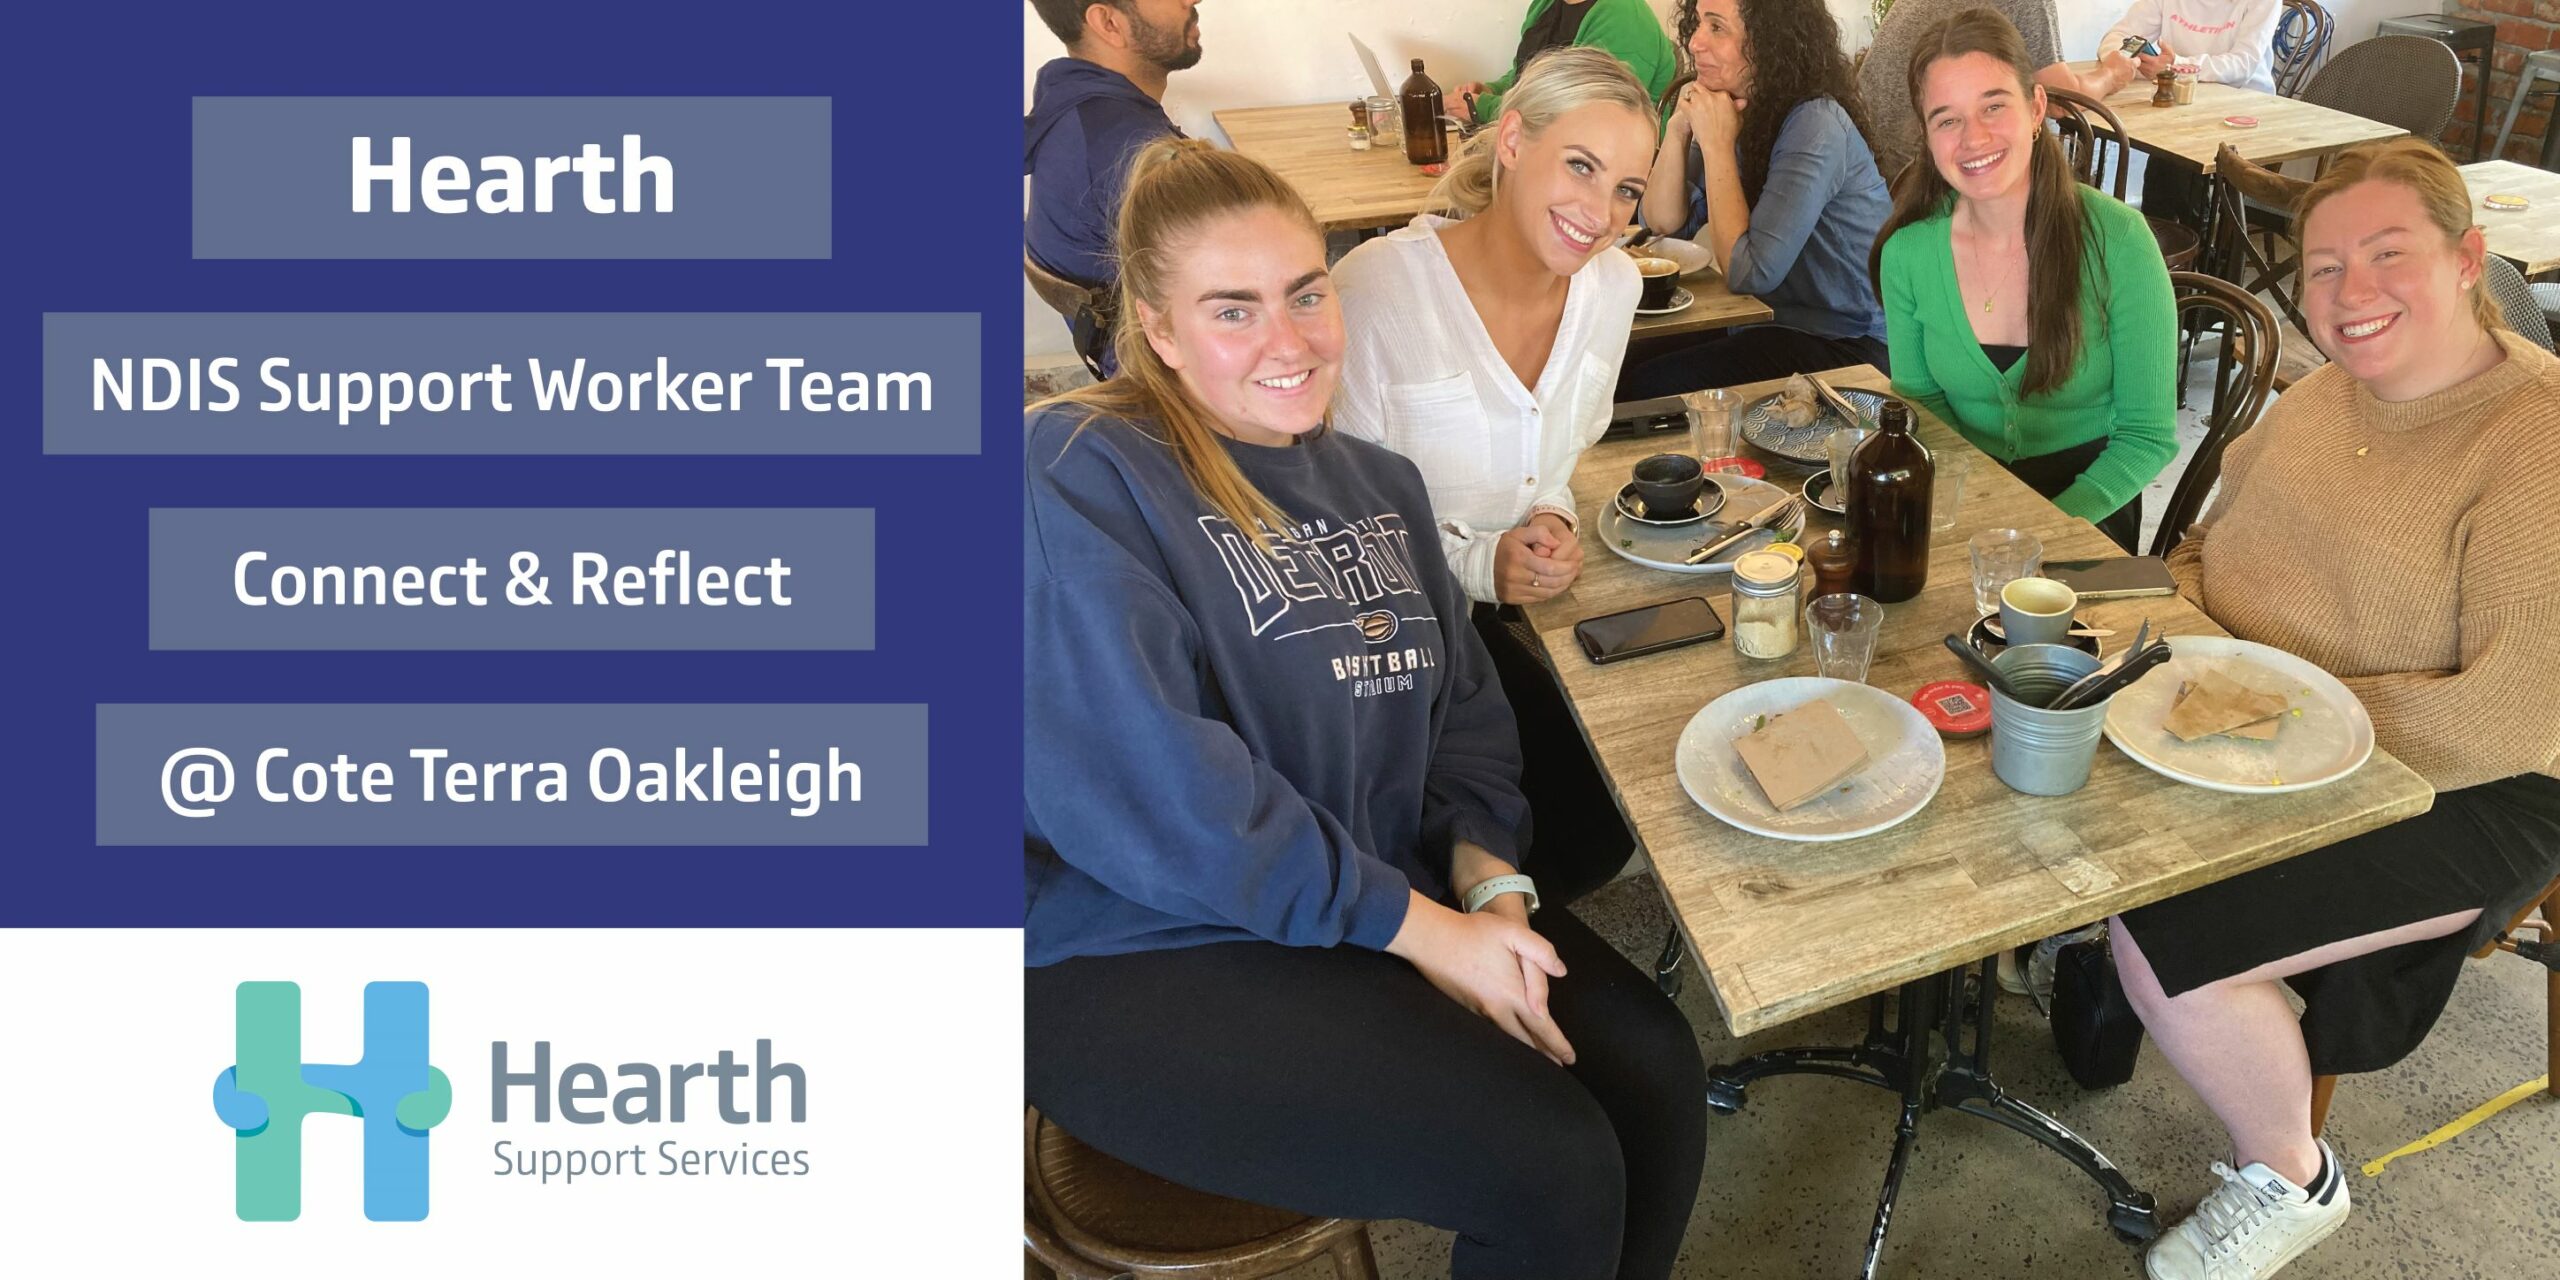 Hearth Support Services Hosts “Support Worker Connect Meeting” at Cote Terra Café Oakleigh